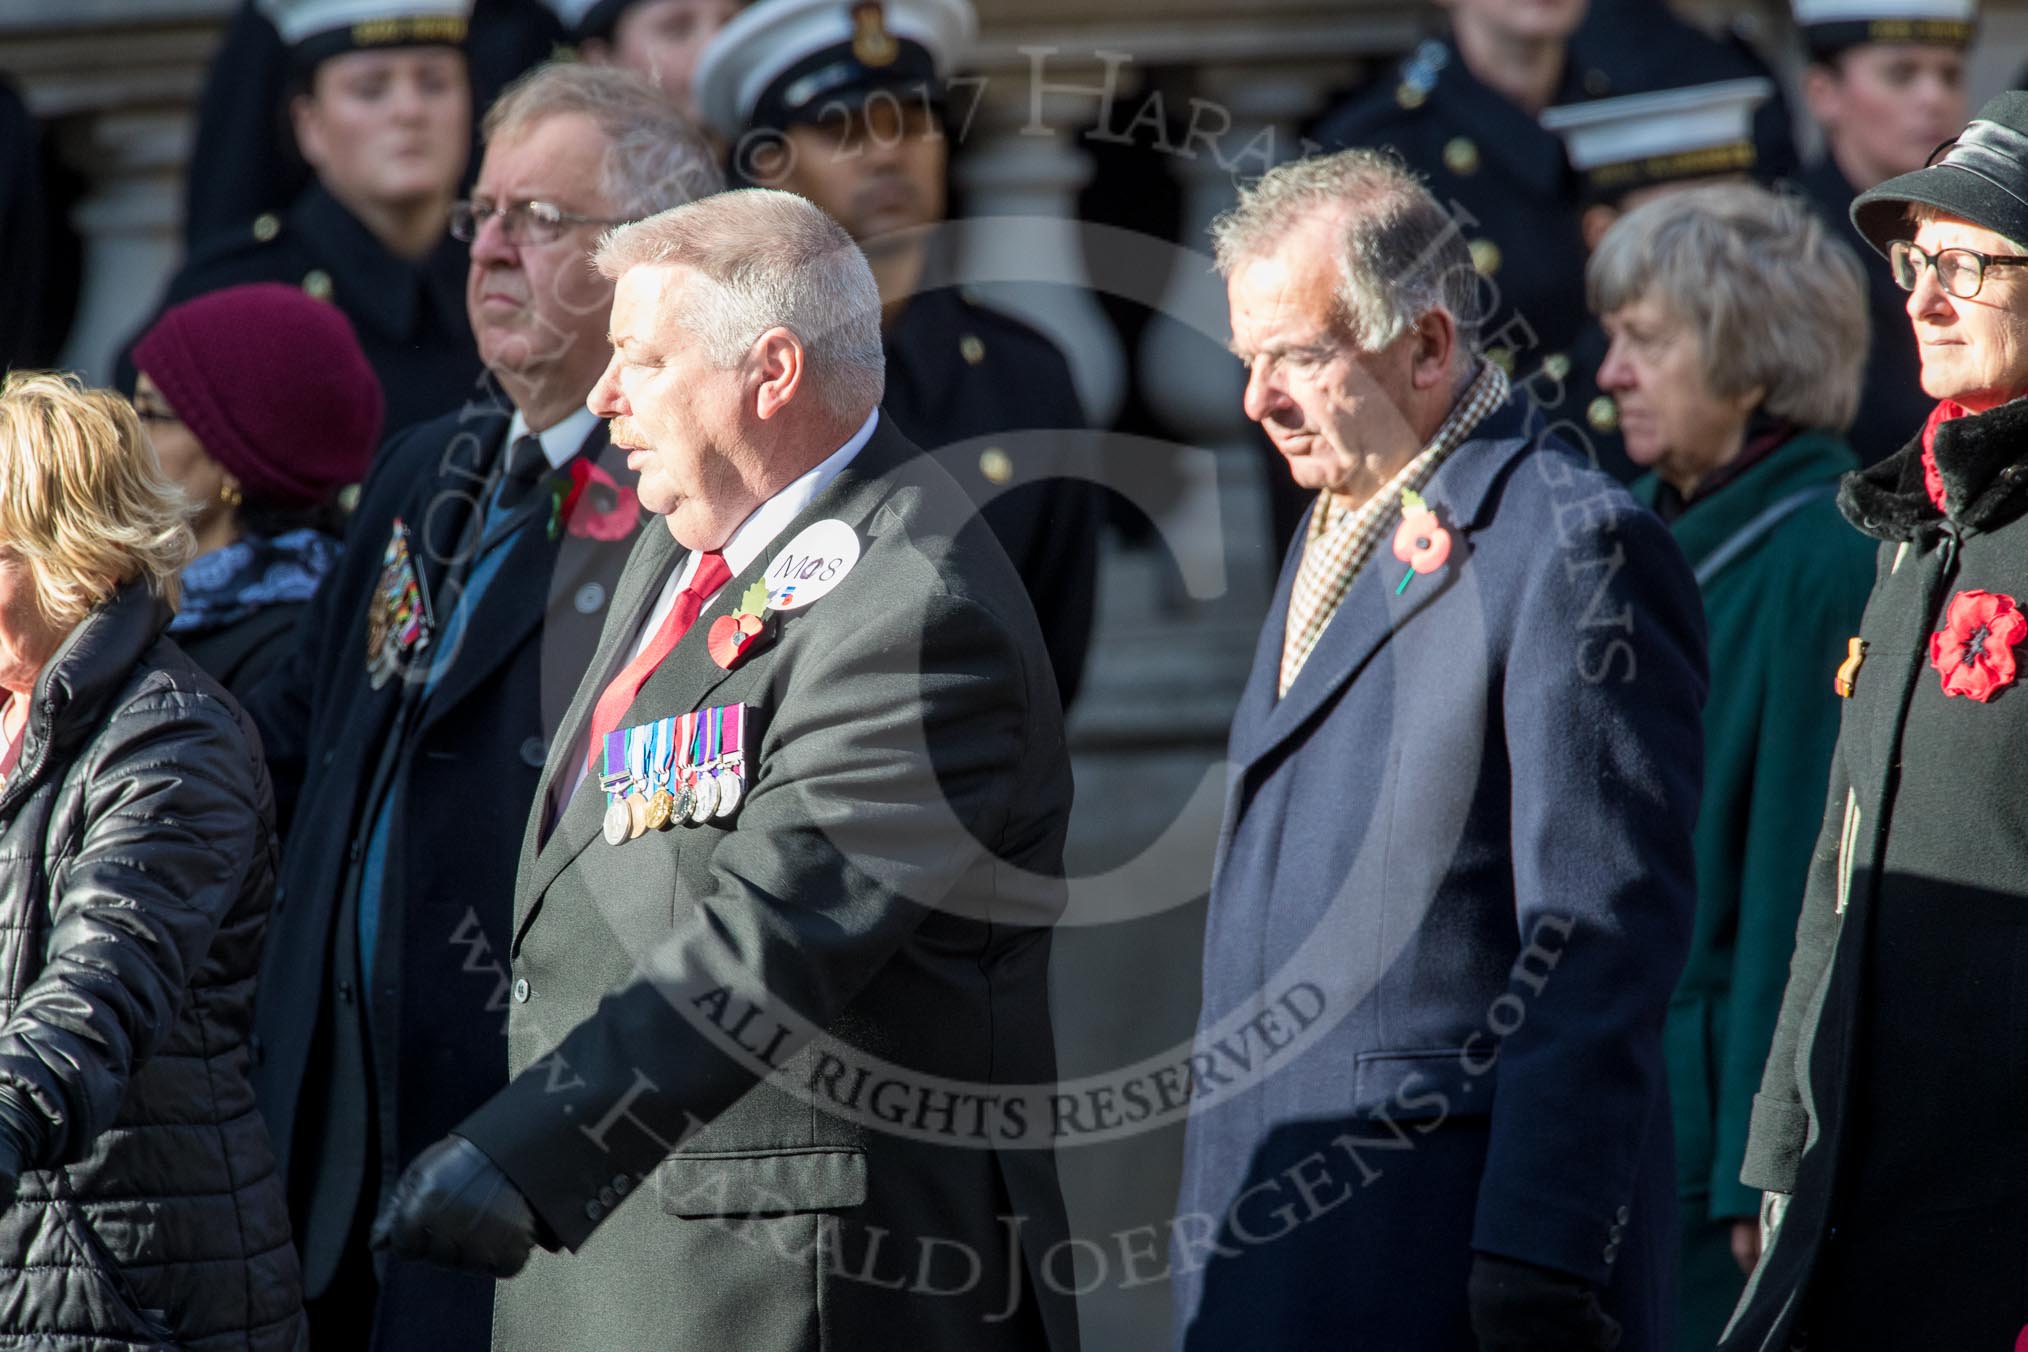 WRVS / RVS (Group M8, 19 members) during the Royal British Legion March Past on Remembrance Sunday at the Cenotaph, Whitehall, Westminster, London, 11 November 2018, 12:26.